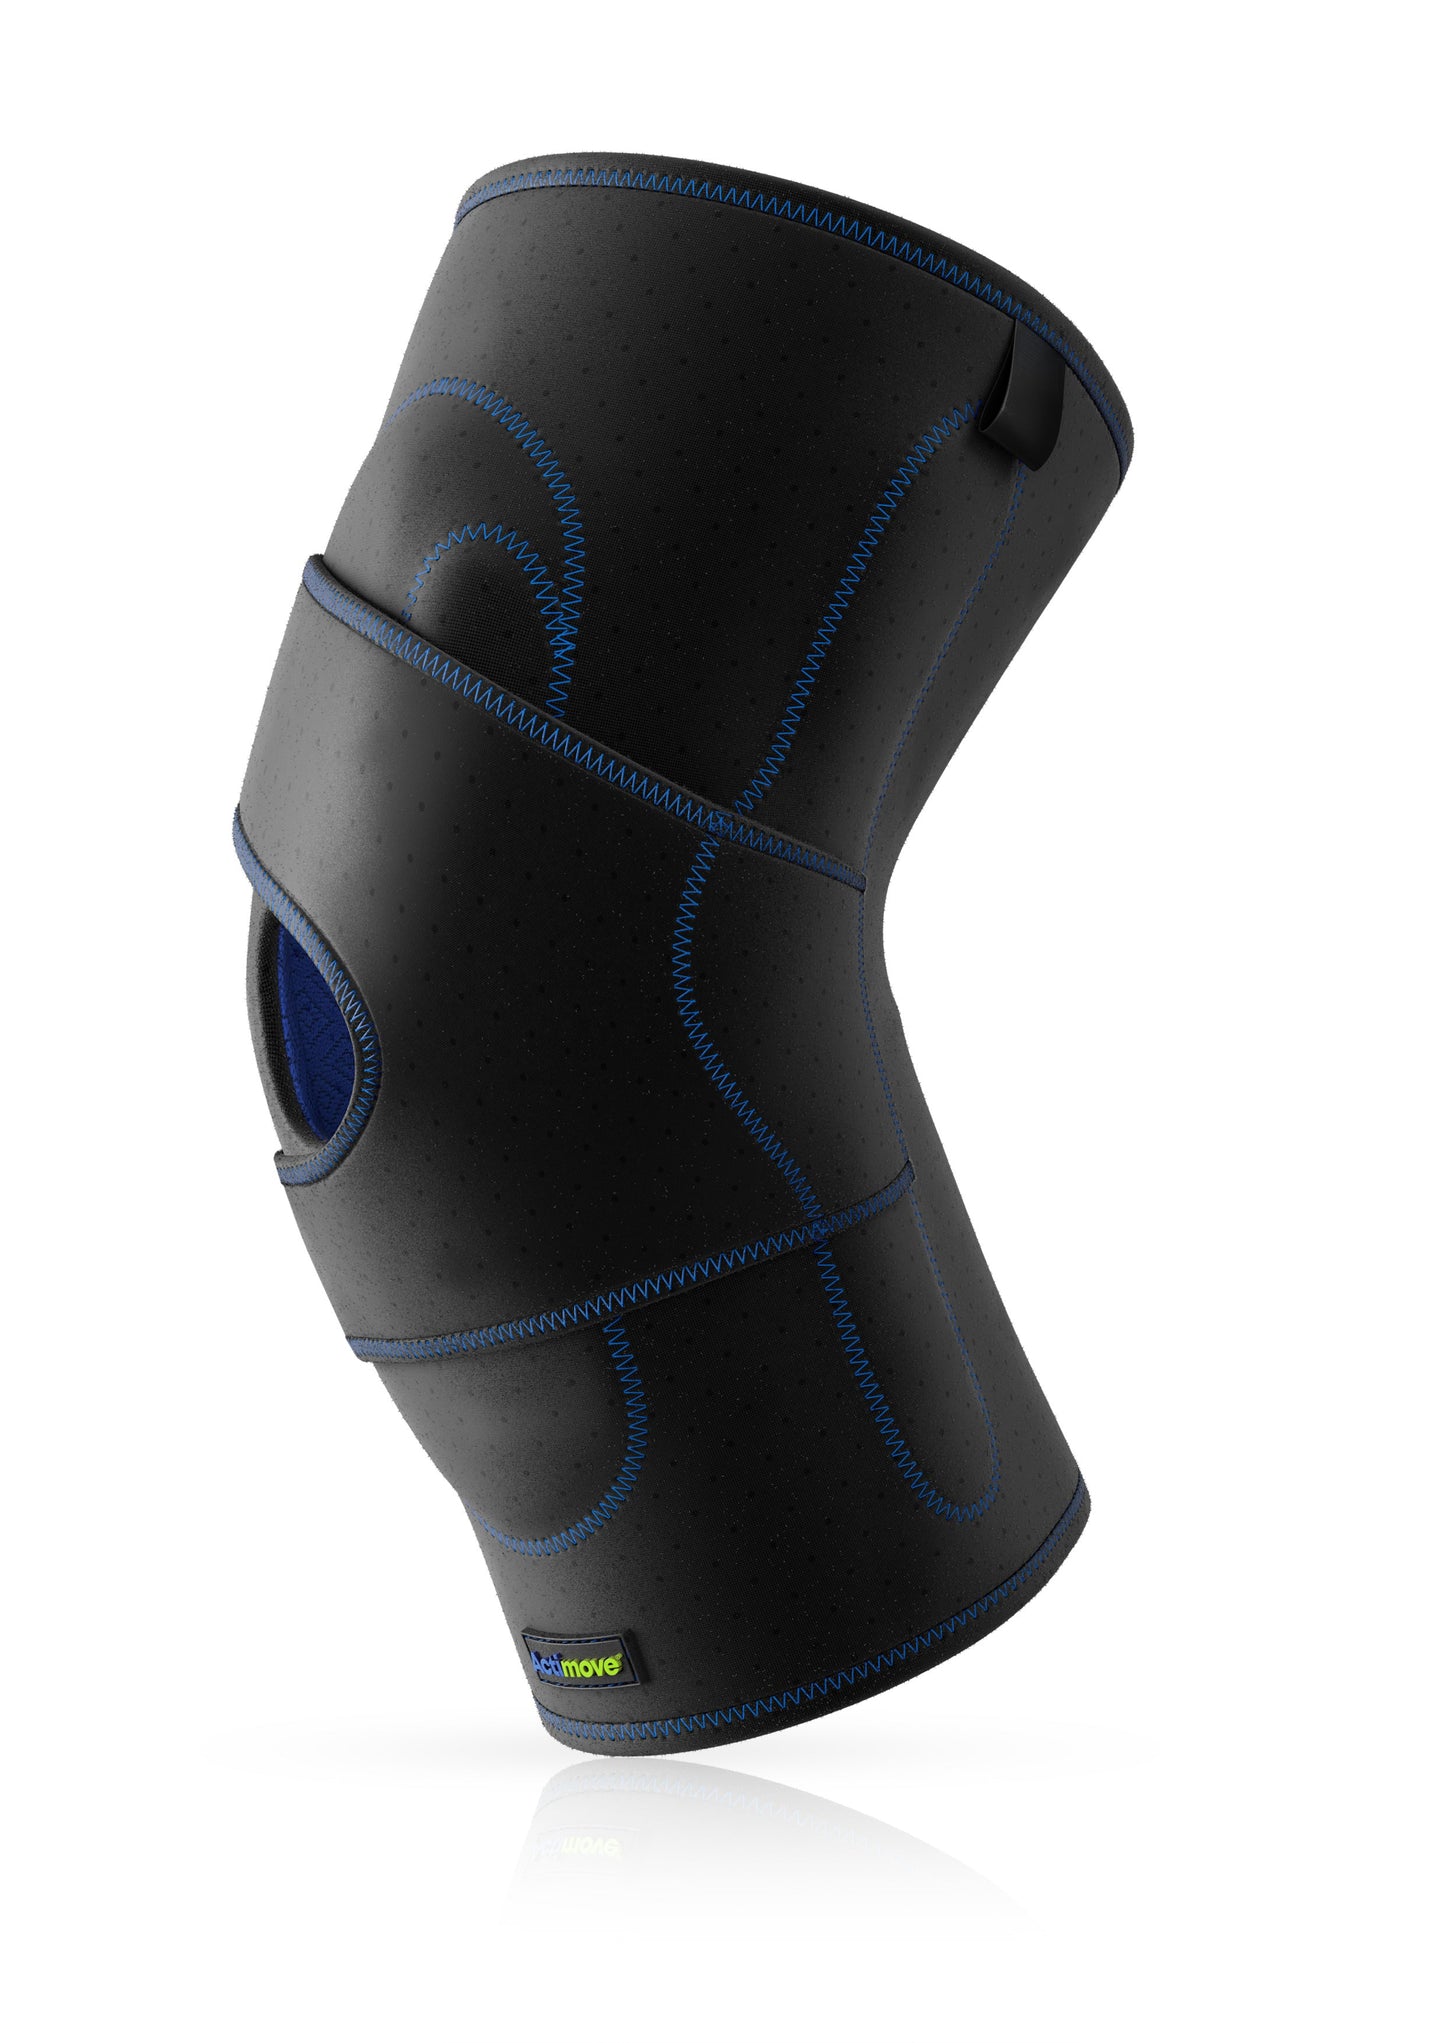 Jobst Actimove Sports Edition PF Knee Brace Lateral Support Simple Hinges